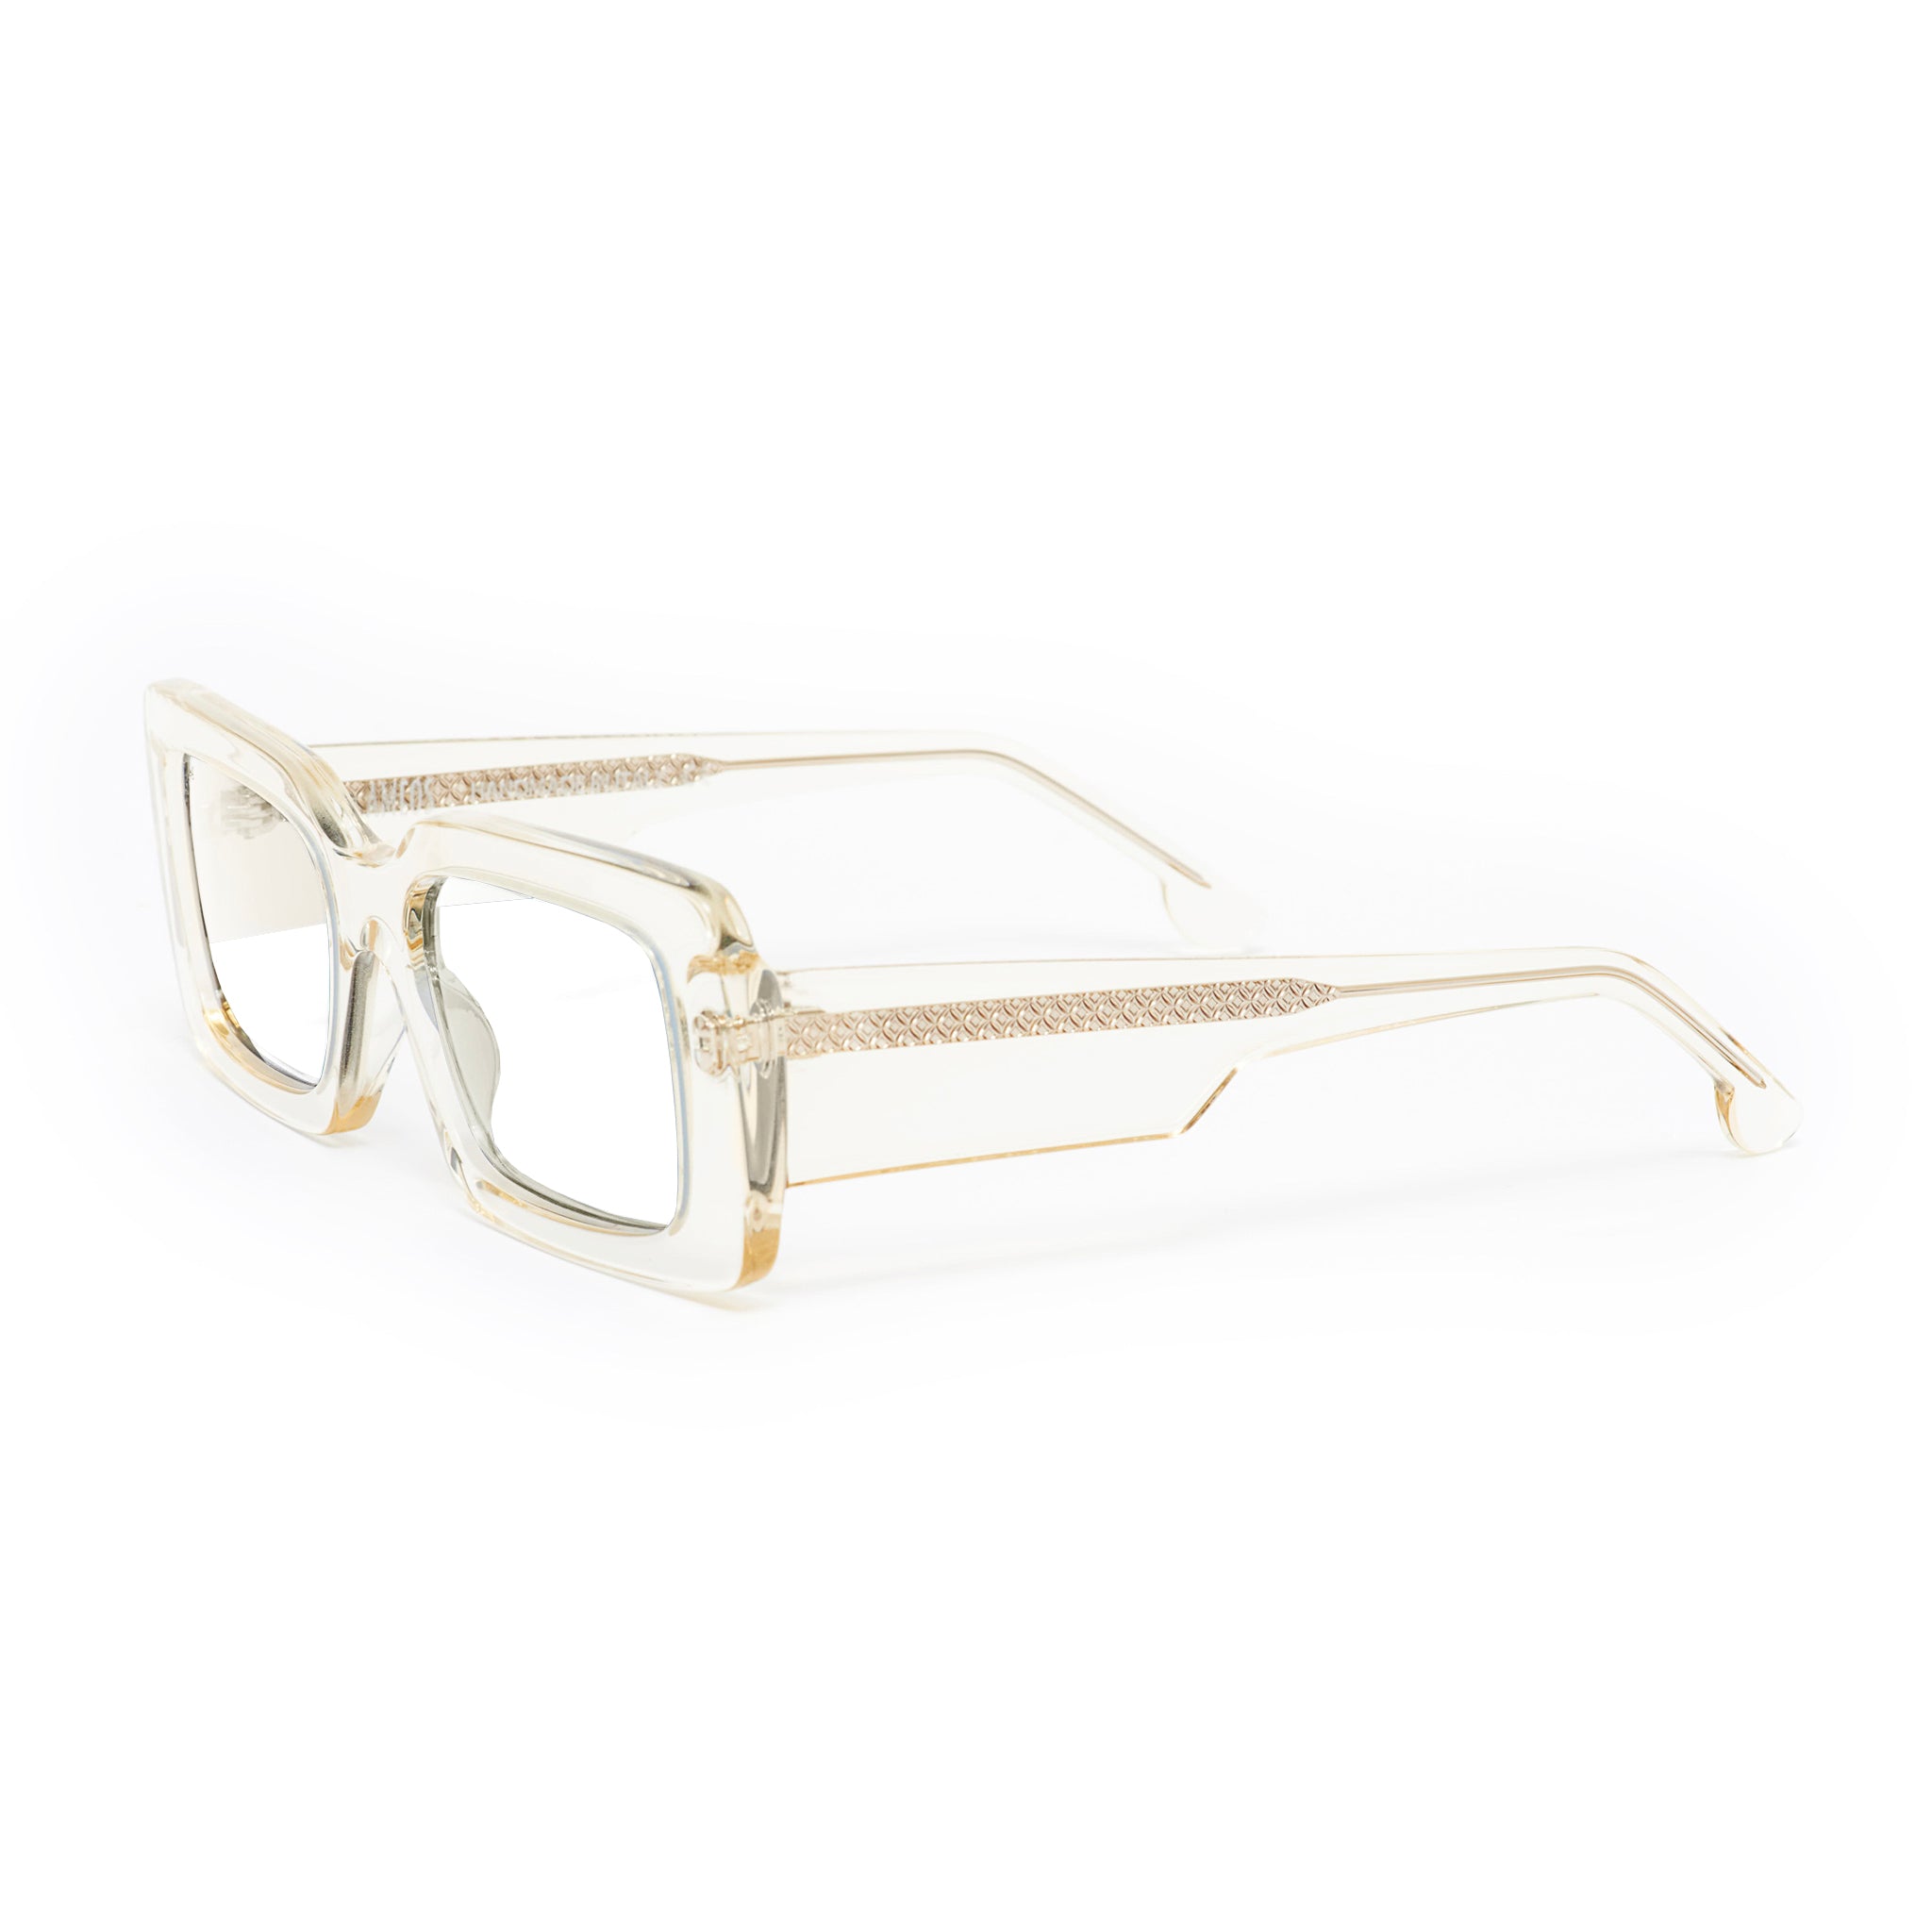 Ameos eyewear noelle optical glasses in transparent frames. Unisex and handmade in Italy.